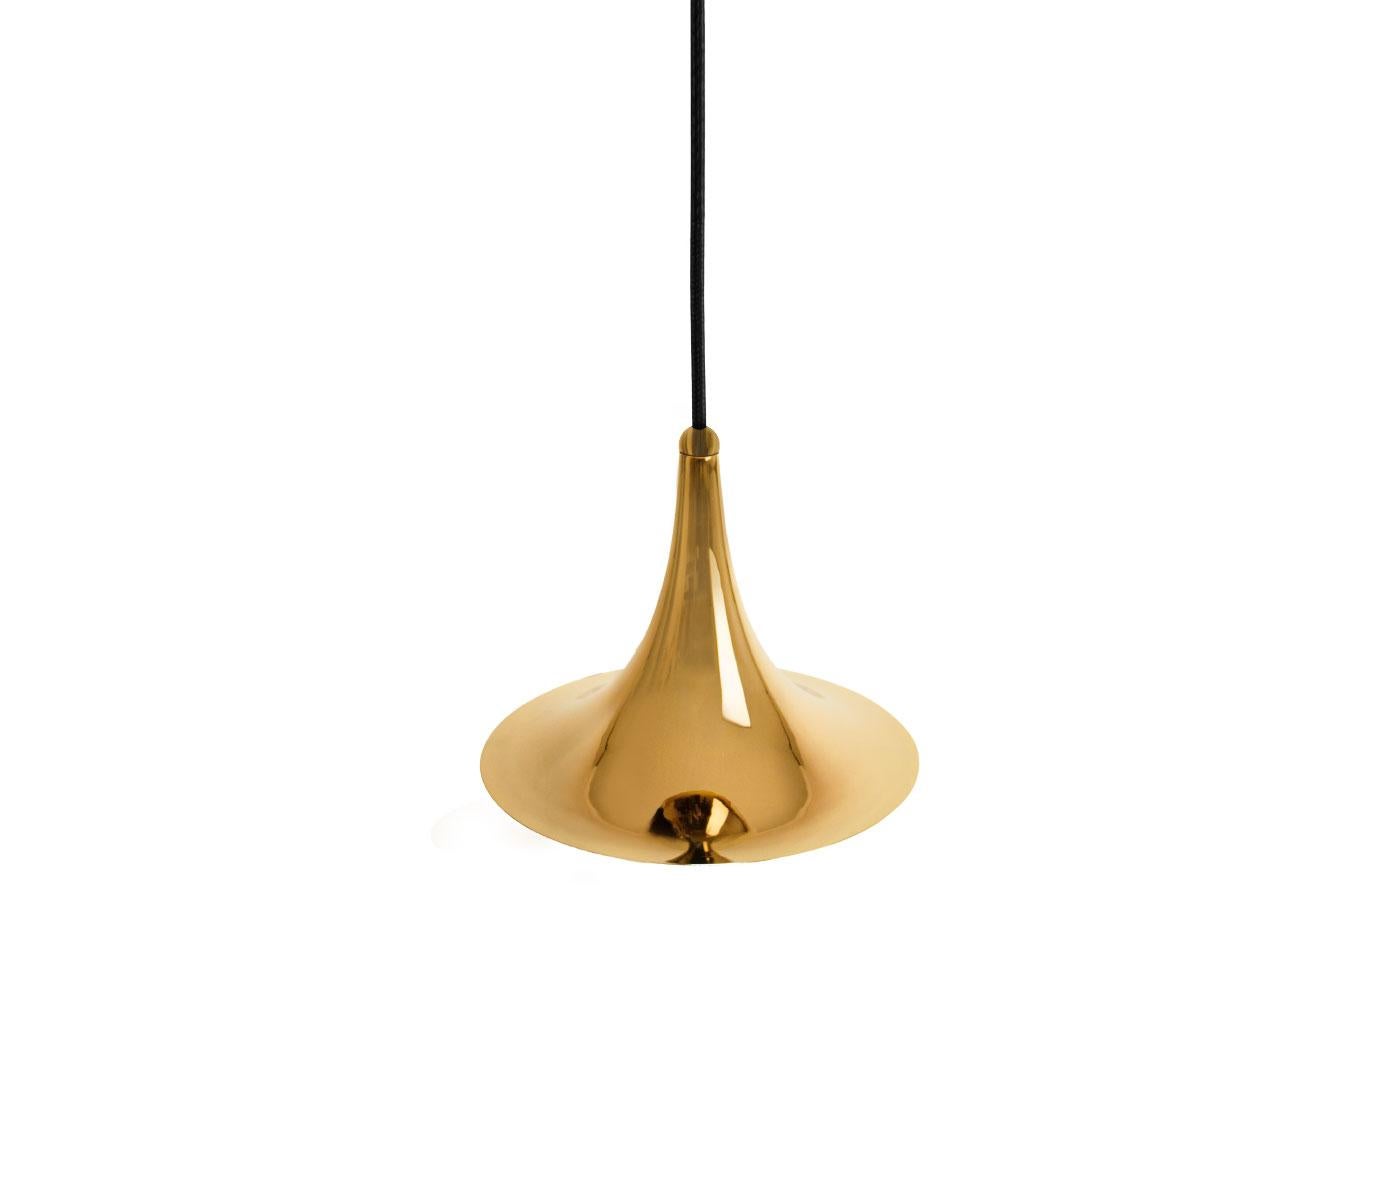 Montreal is quite known for the largest jazz festival in the world, International Jazz Festival. The Montreal modern pendant lamp is a contemporary lighting piece that honors the artistic output of the city’s jazz history, capturing innovation and